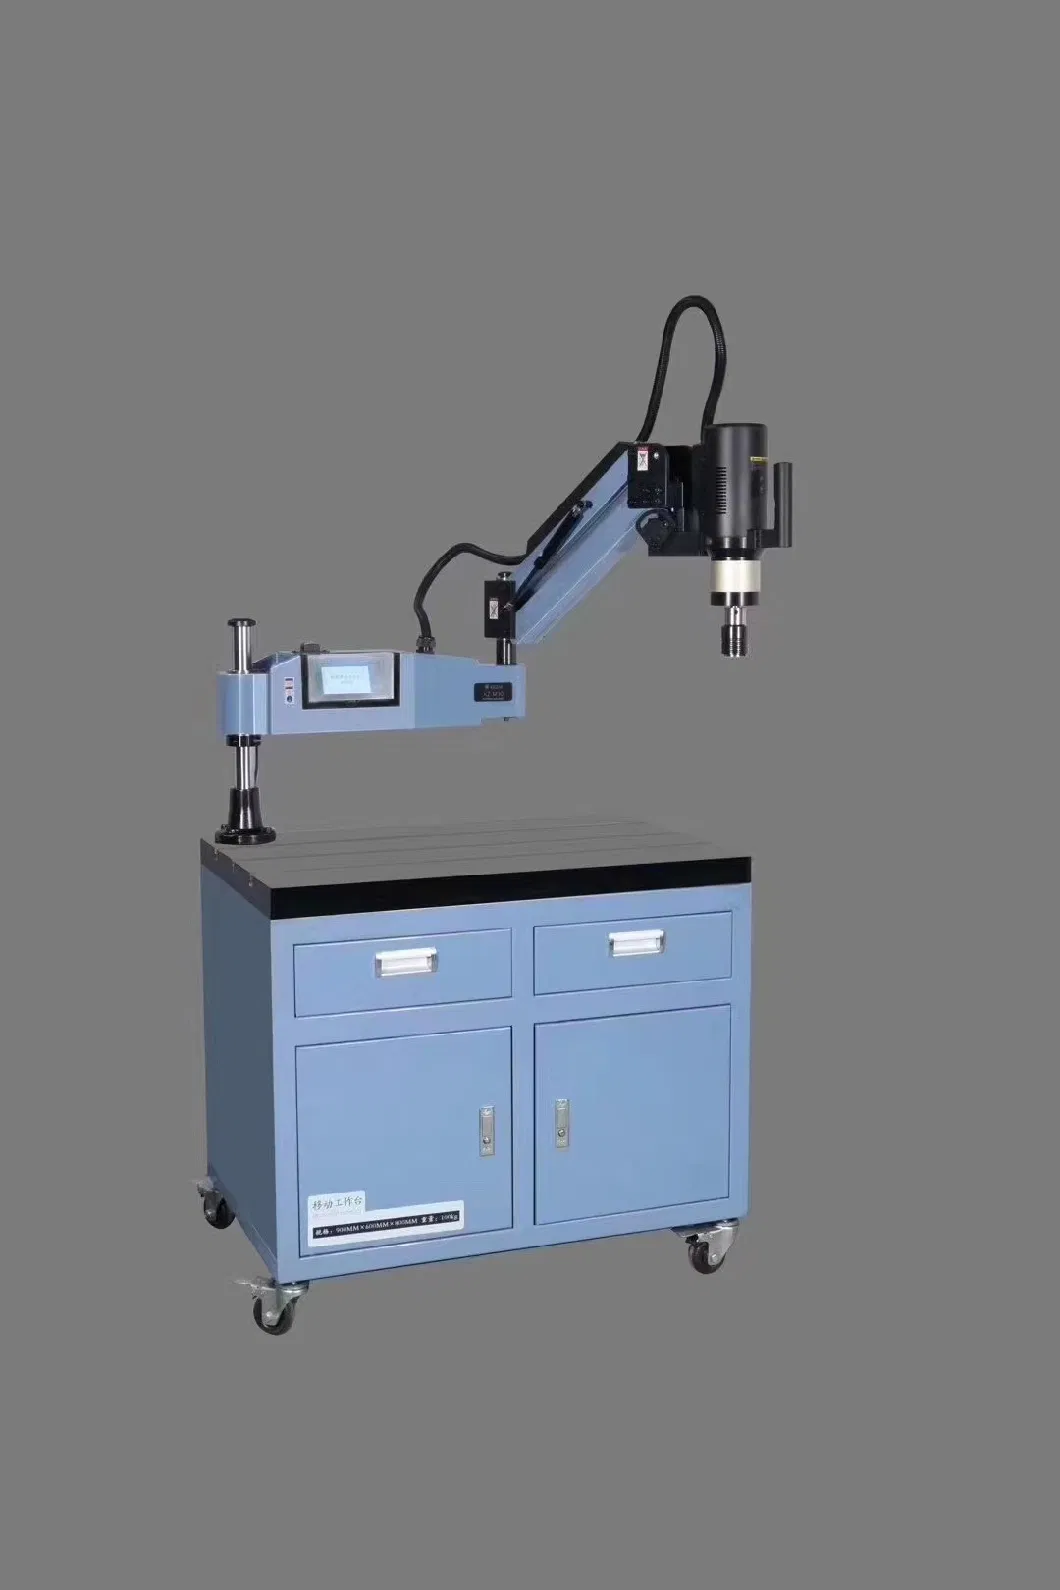 New Style M3-M16 Vertical Tapper Machine Electric Drilling and Tapping Machine M3-M16 Flexible Arm Tapping Milling Machinec6241 Bench Lathe and CNC Machines